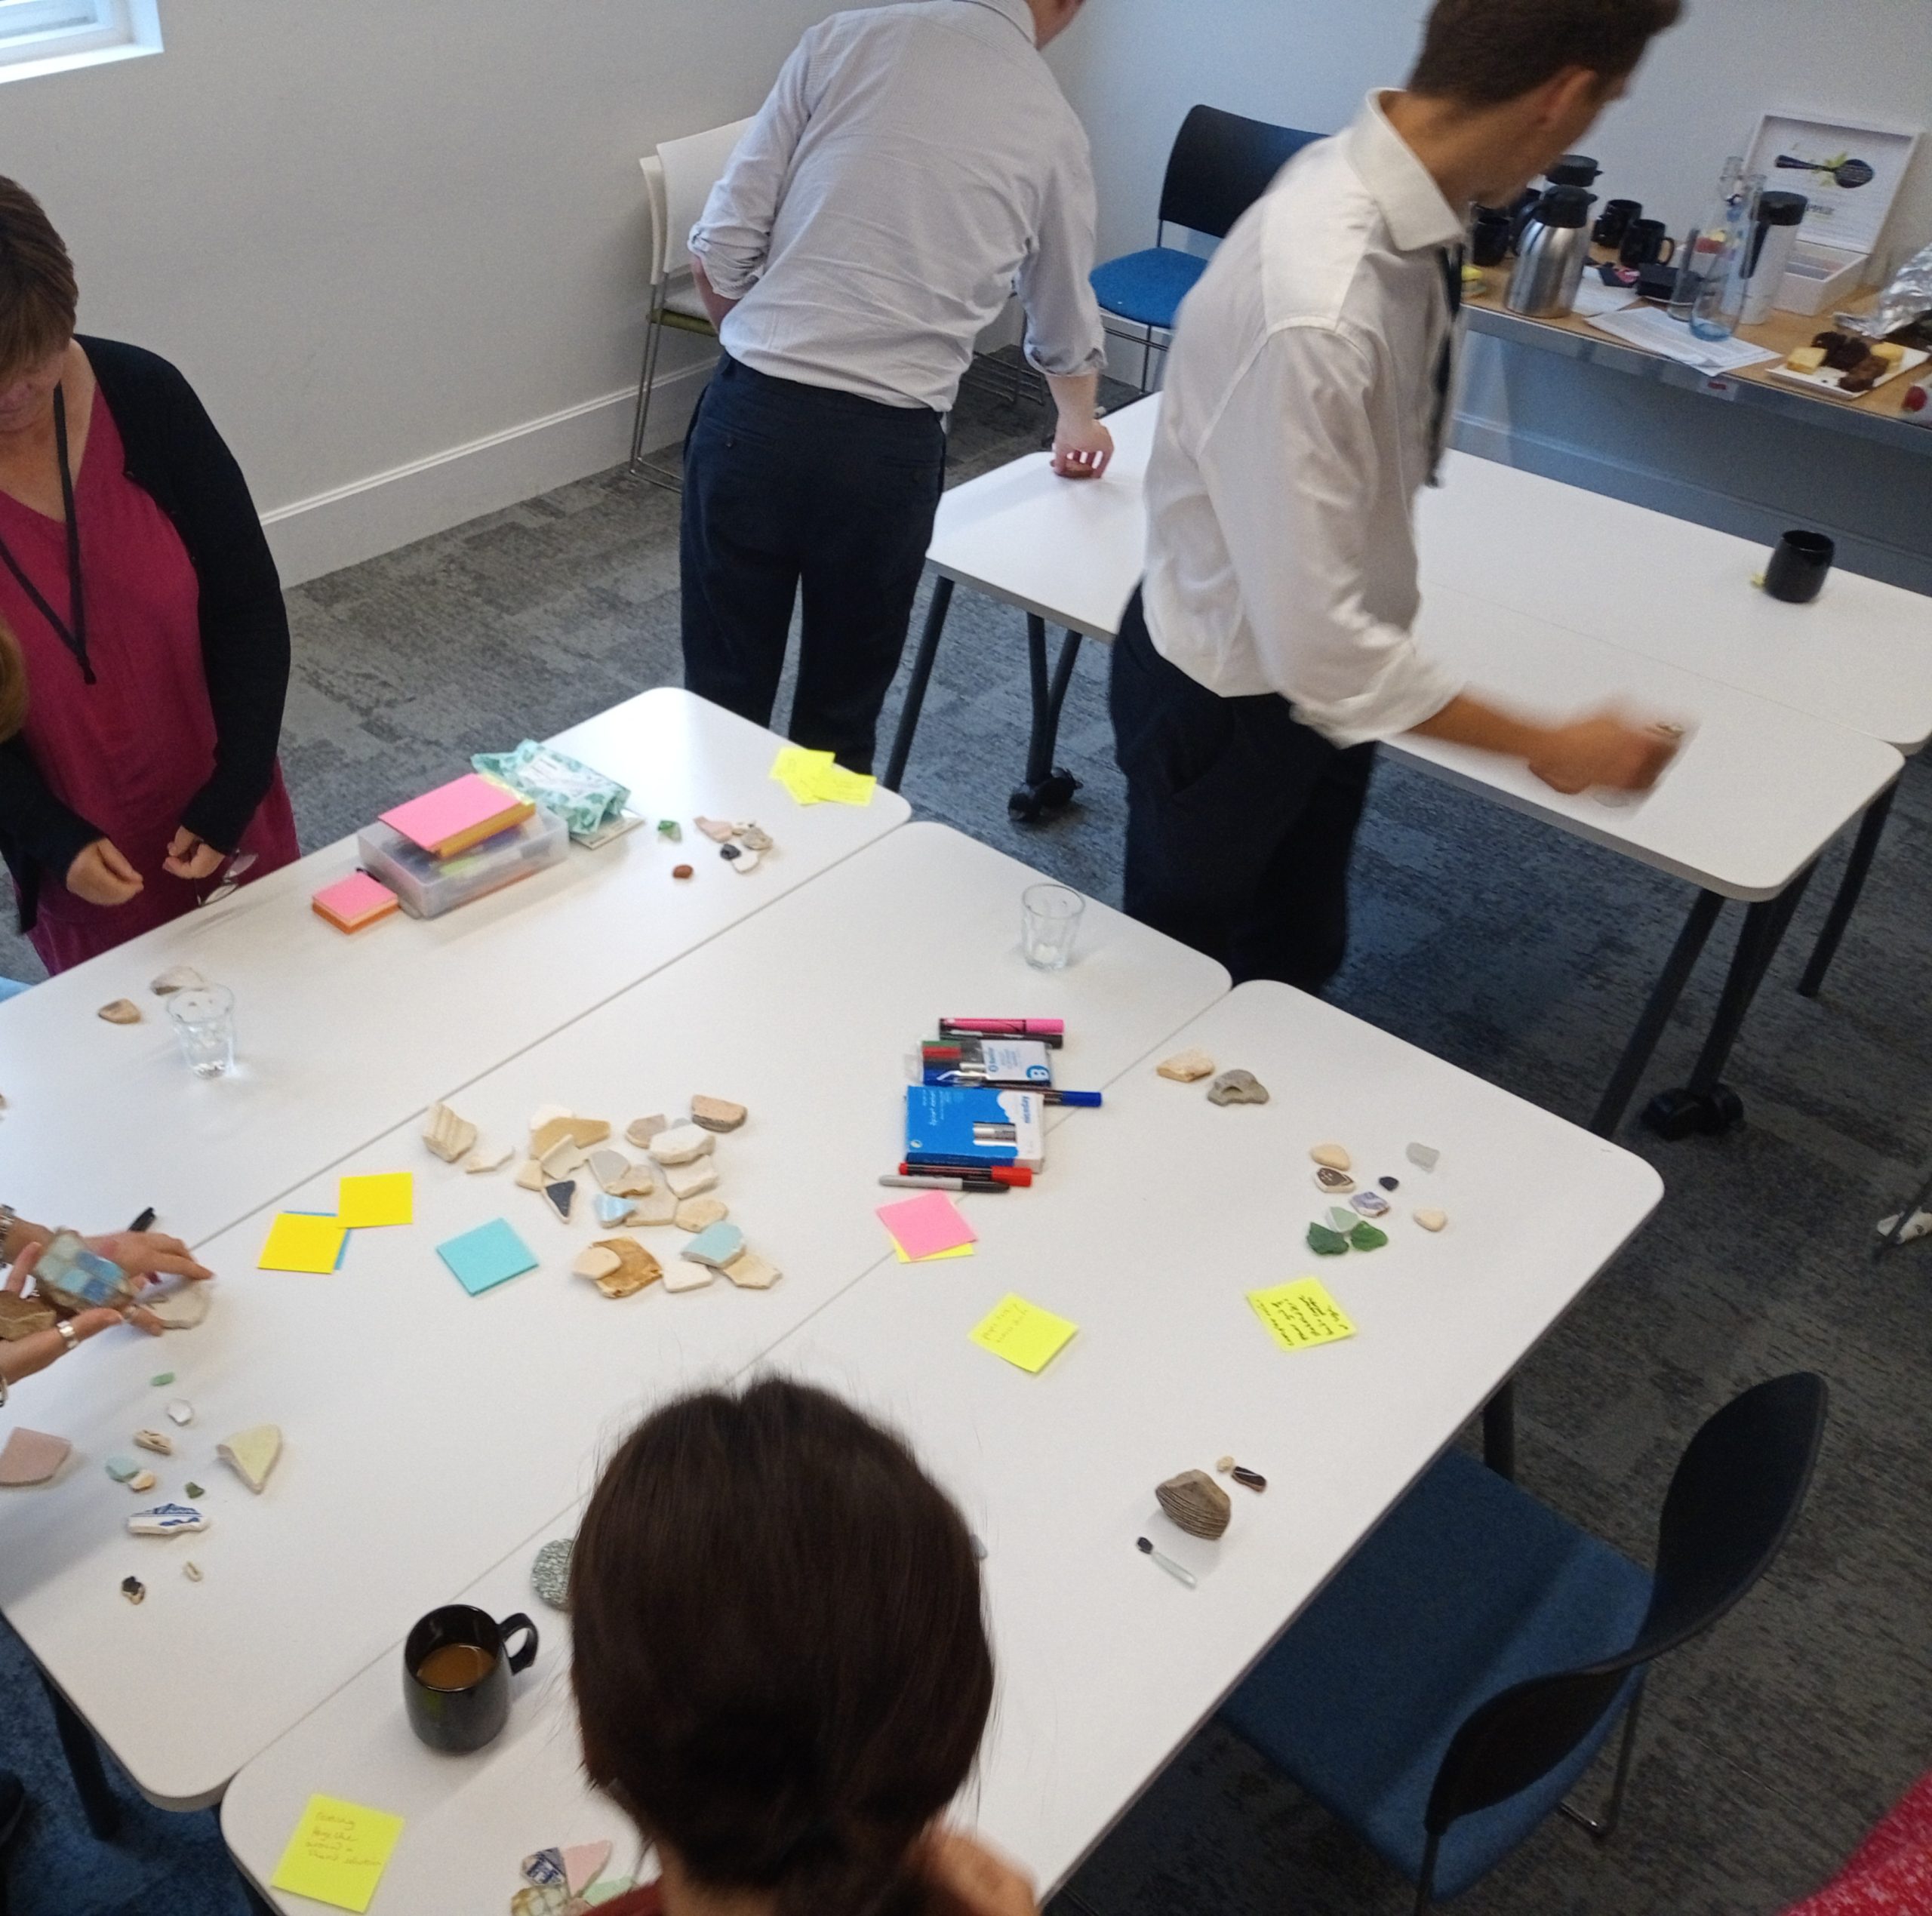 Workshop participants around a table with mosaic pieces, sticky notes and pens